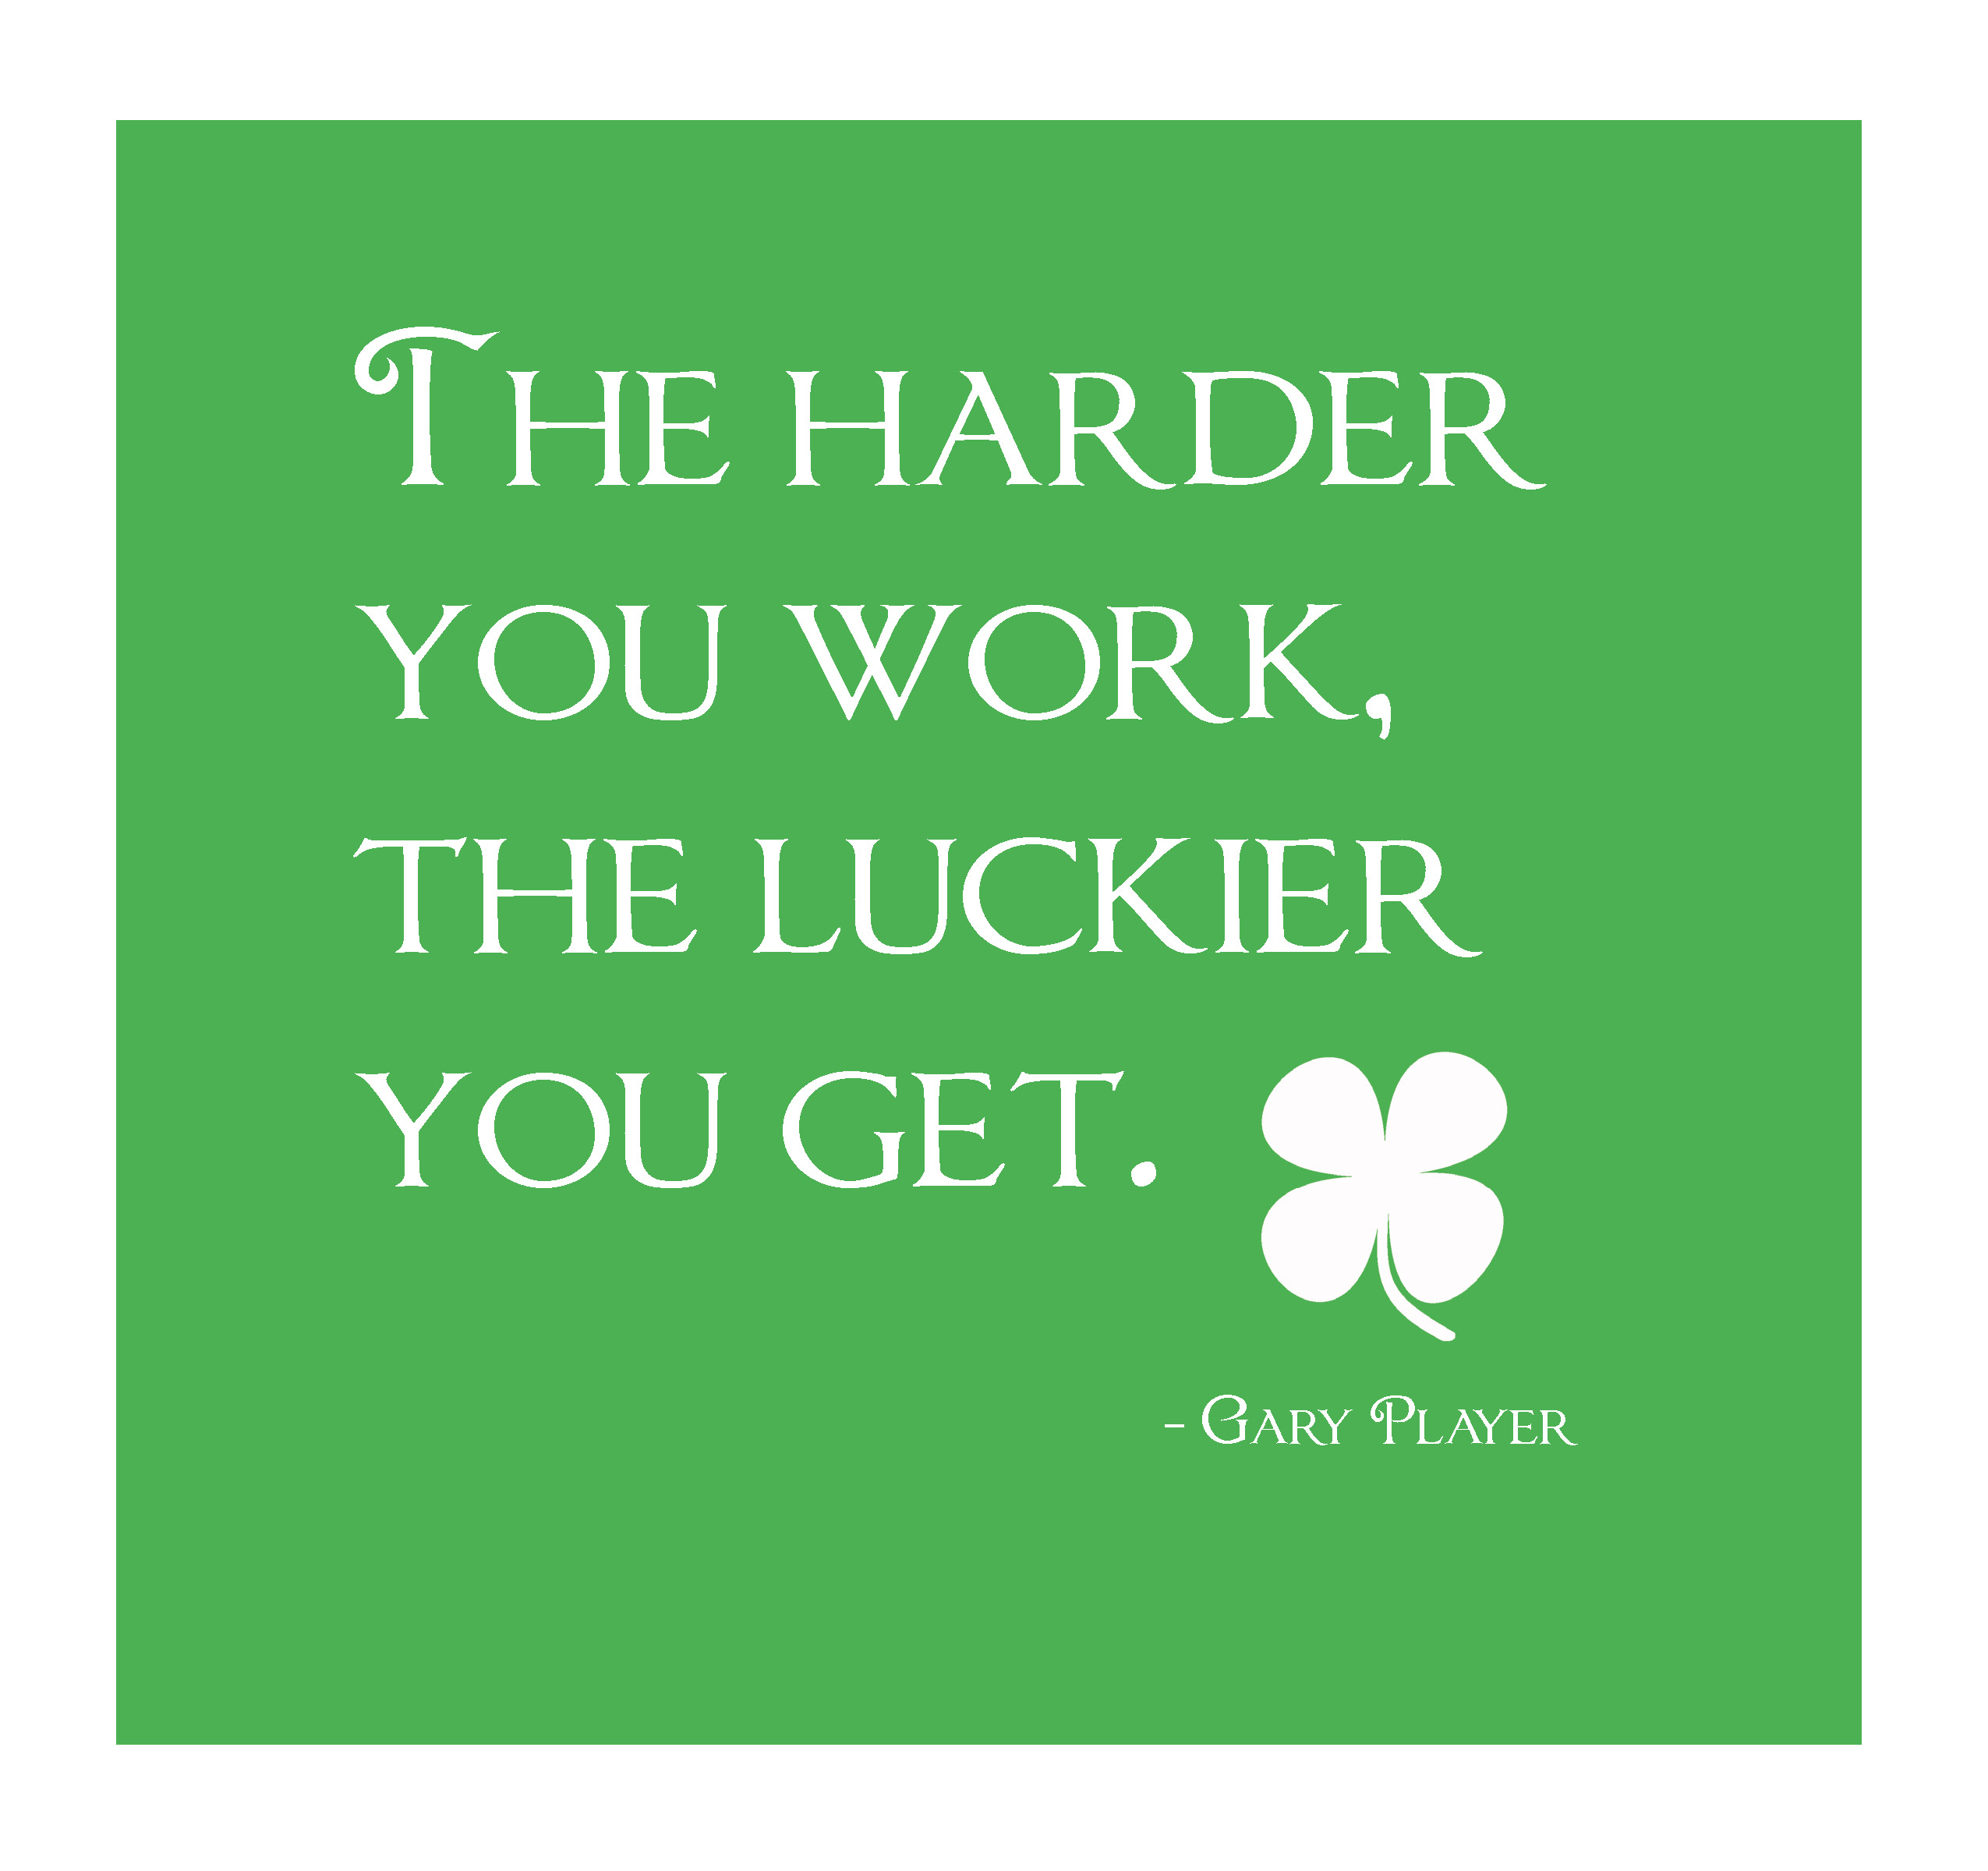 The harder you work, the luckier you get. Gary Player